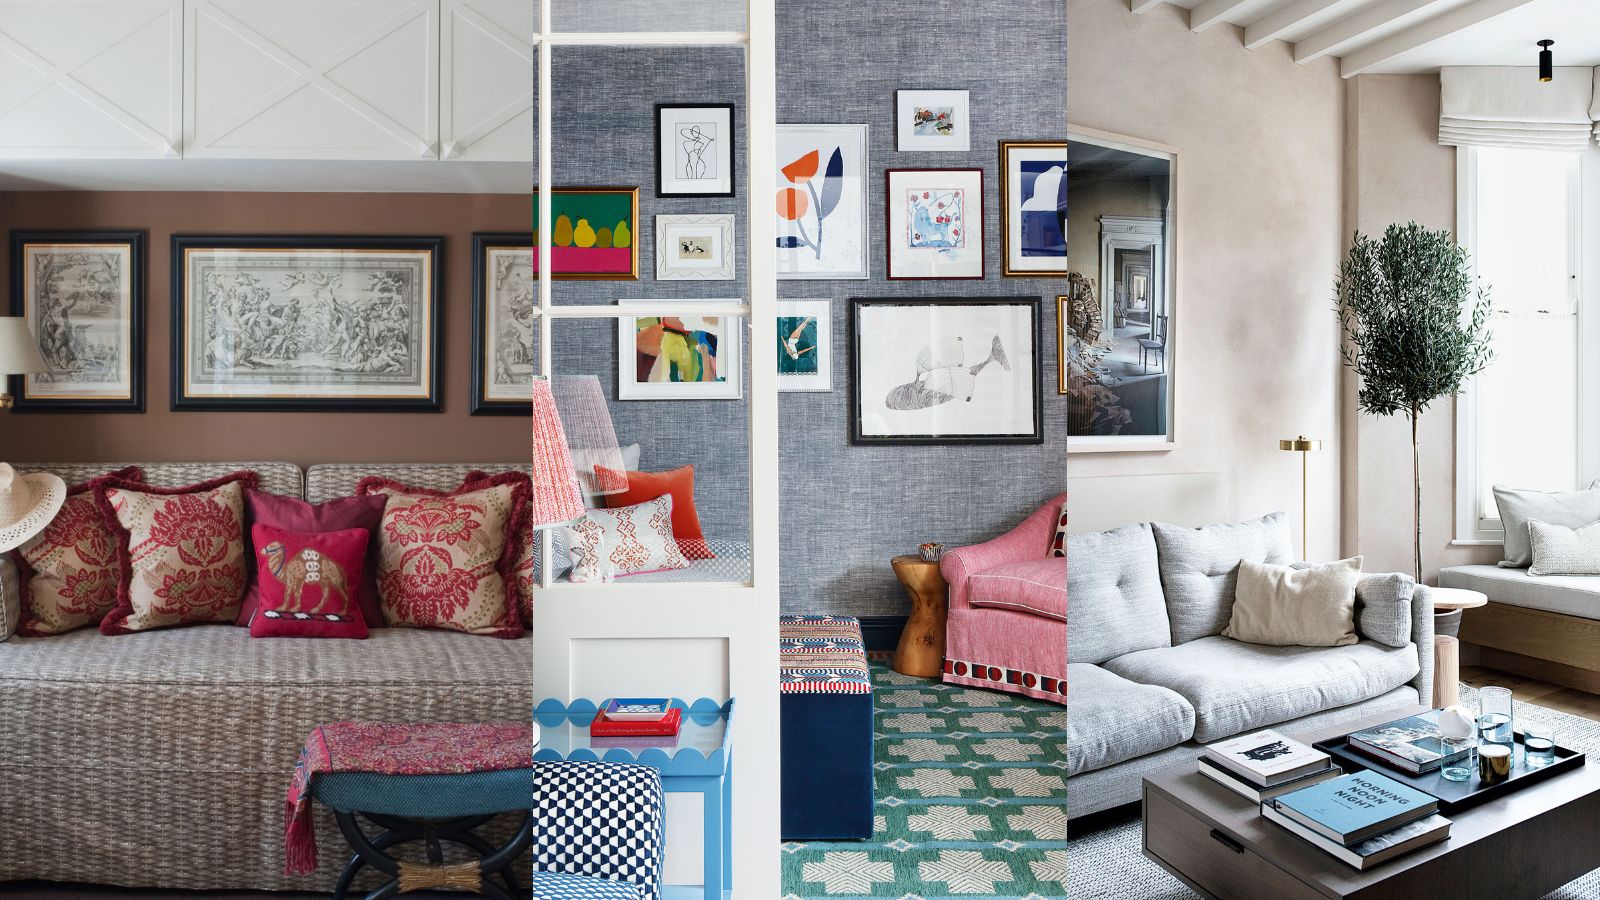 Snug room ideas – 9 ways to design and furnish our favorite room in the home